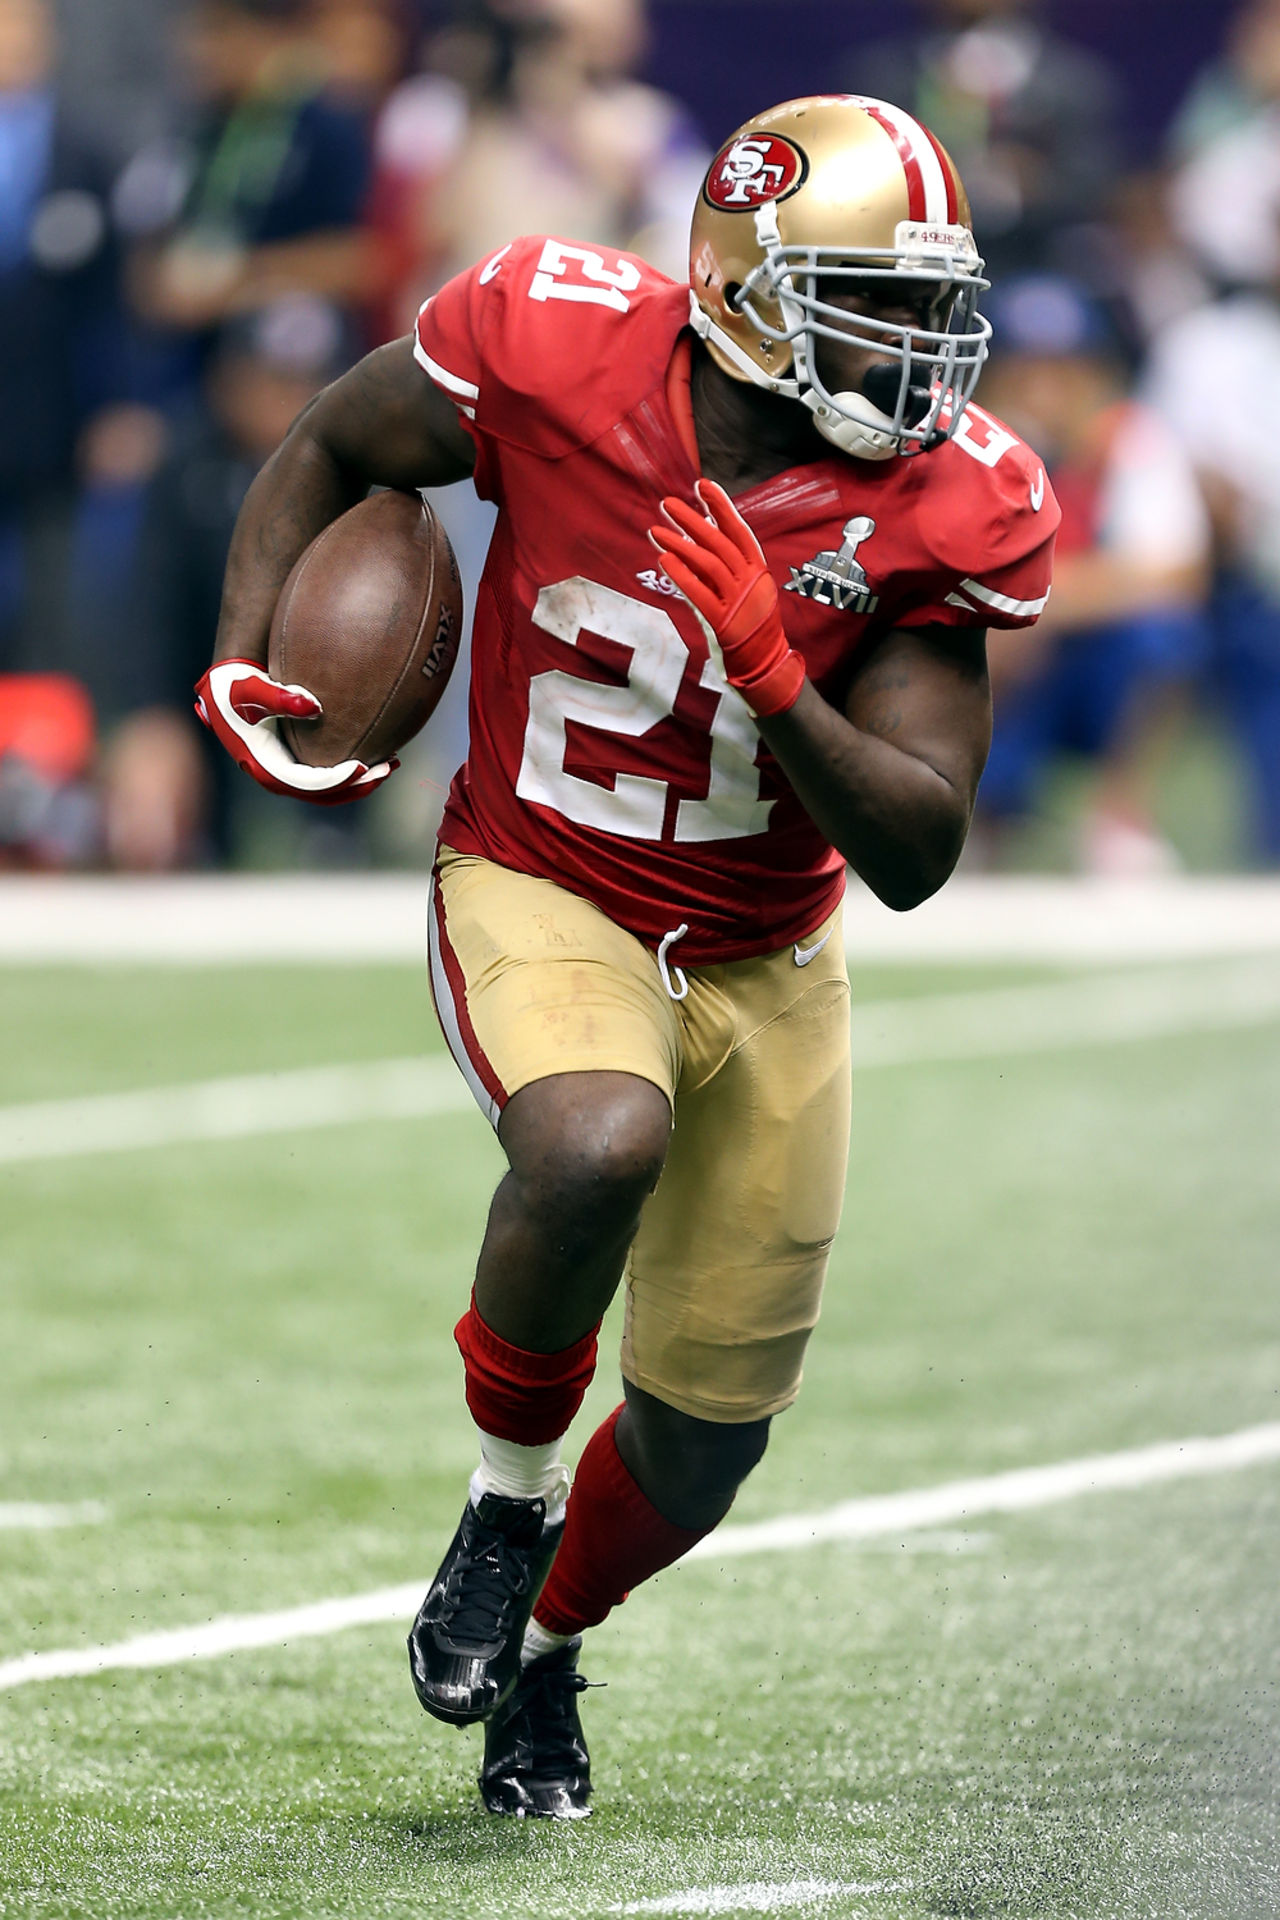 2000x1333px 187 Frank Gore Wallpapers